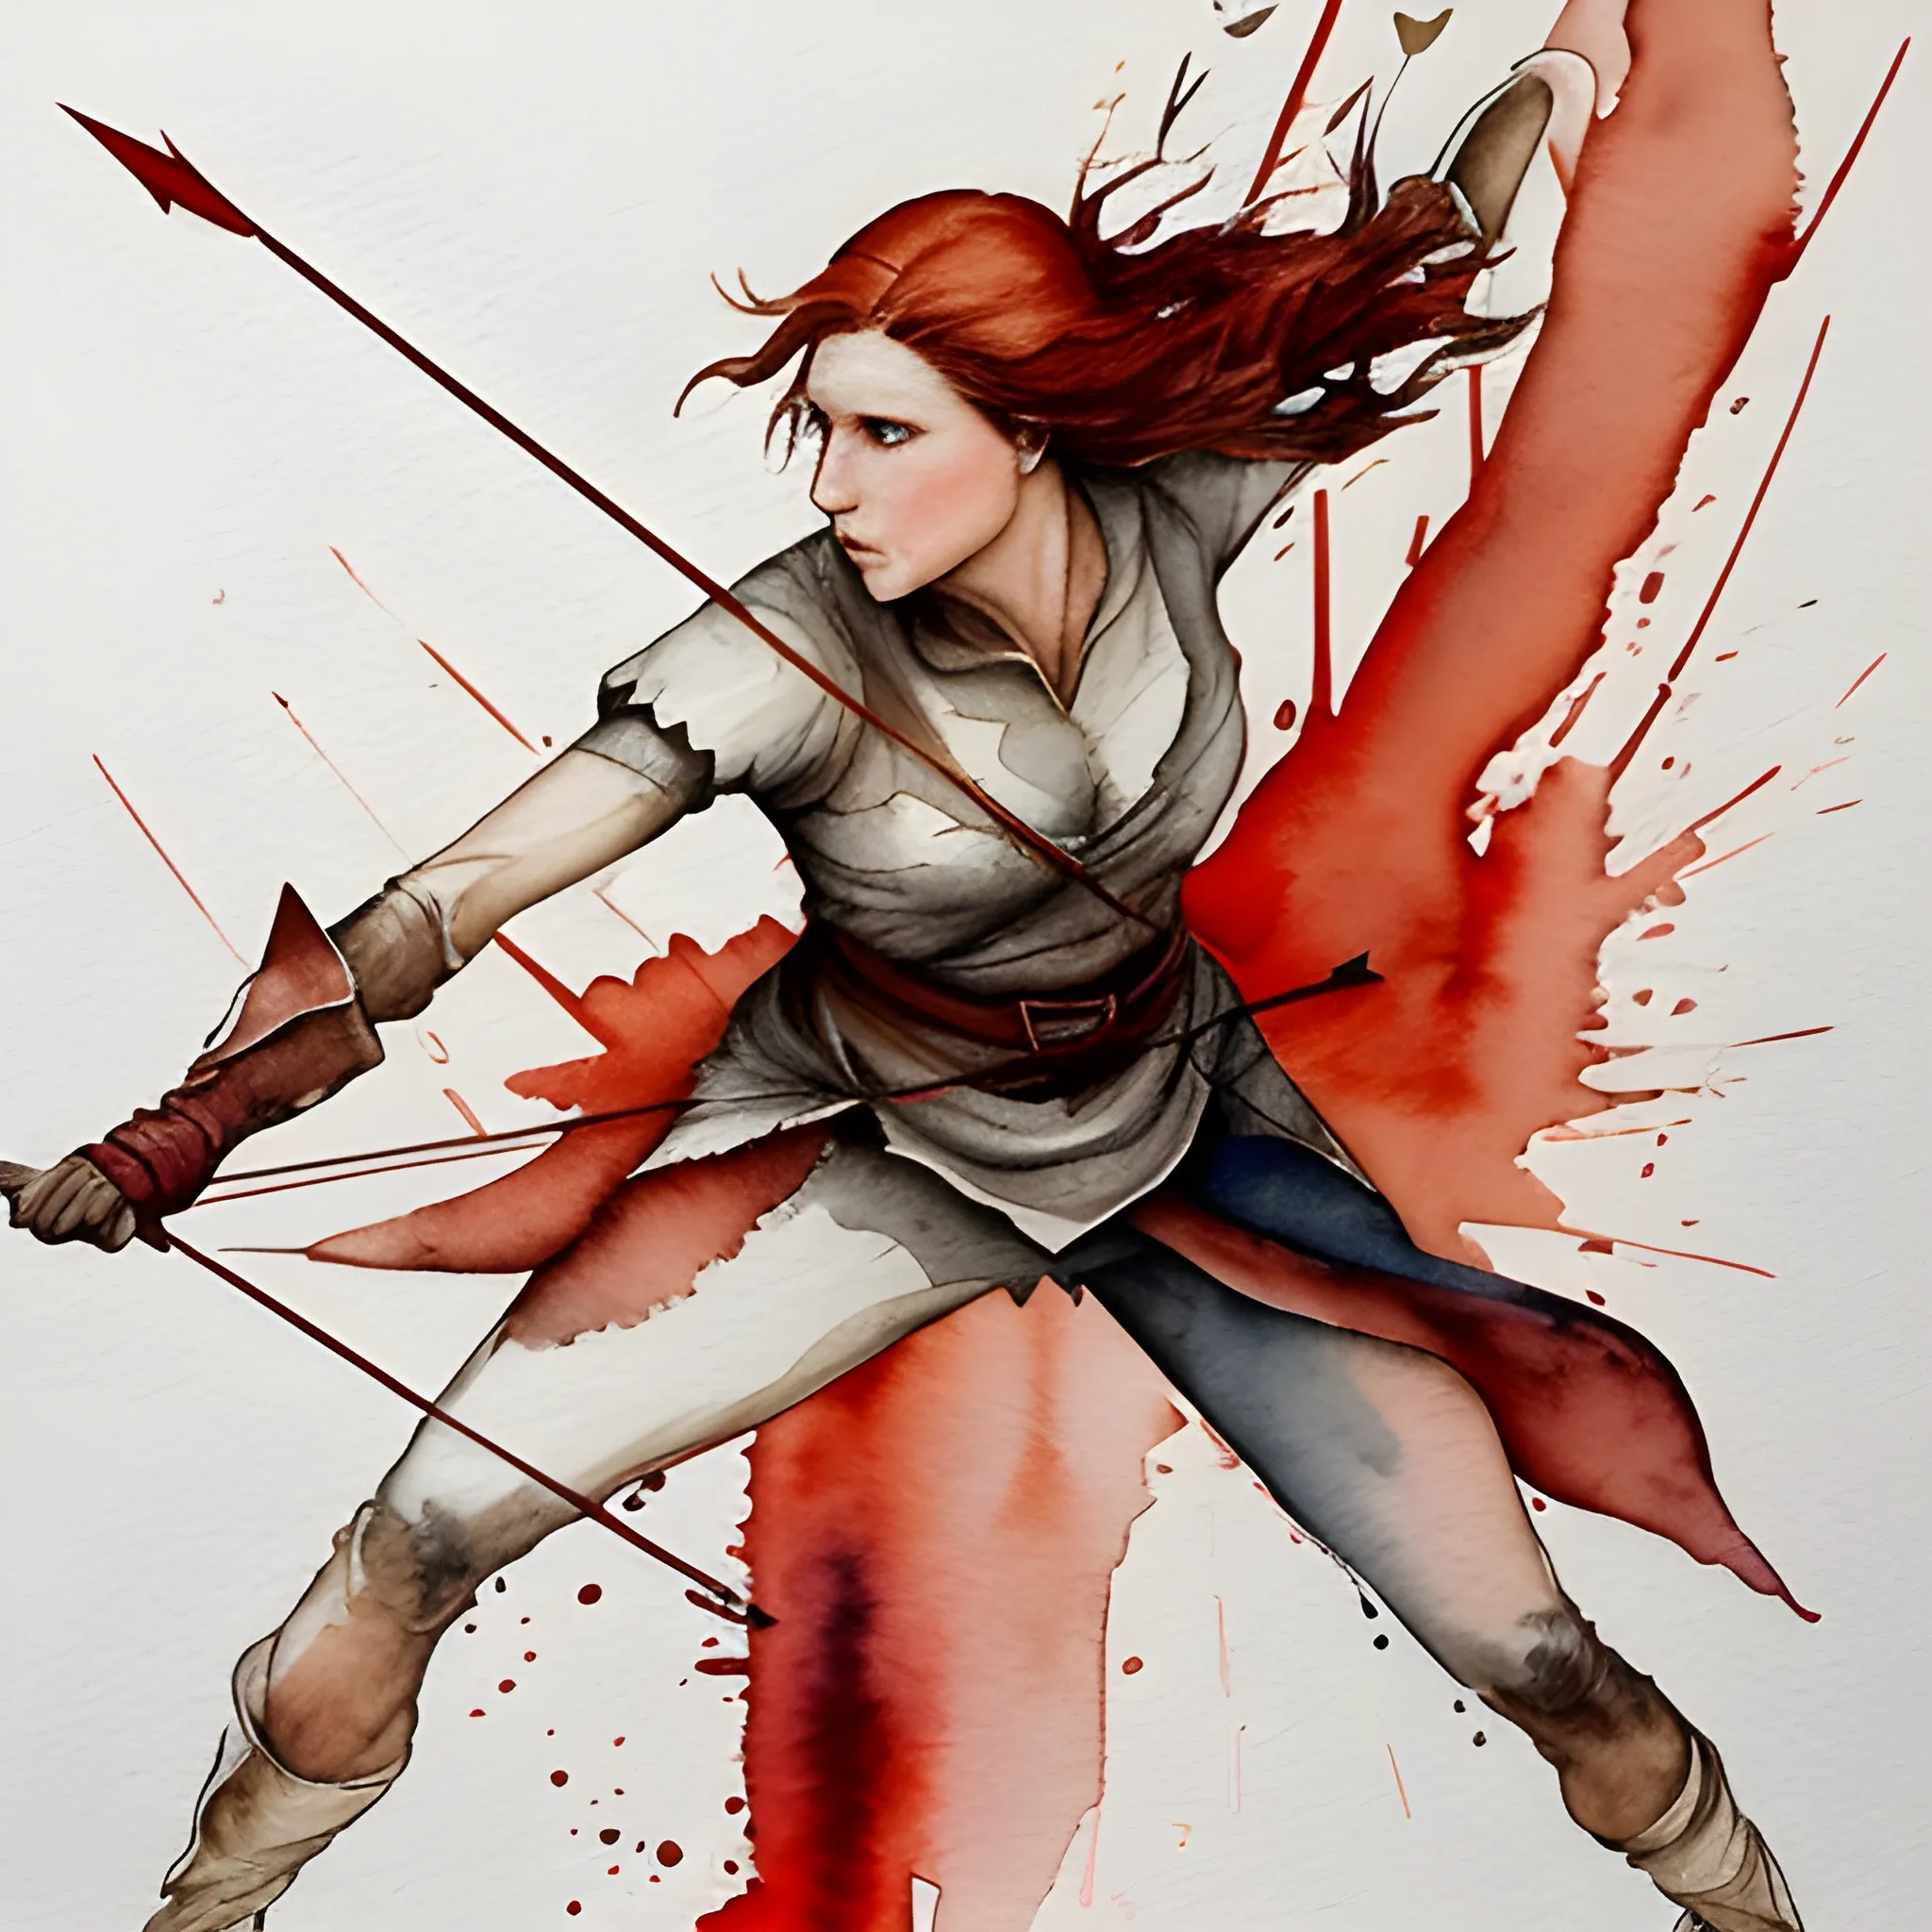 Create a watercolor painting of a woman dodging arrows in an artistic style. The drawing should be predominantly in shades of red. The woman should be dodging arrows flying towards her from different directions. Make her expression reflect determination and bravery as she avoids the arrows. The scene should convey a sense of action and dange